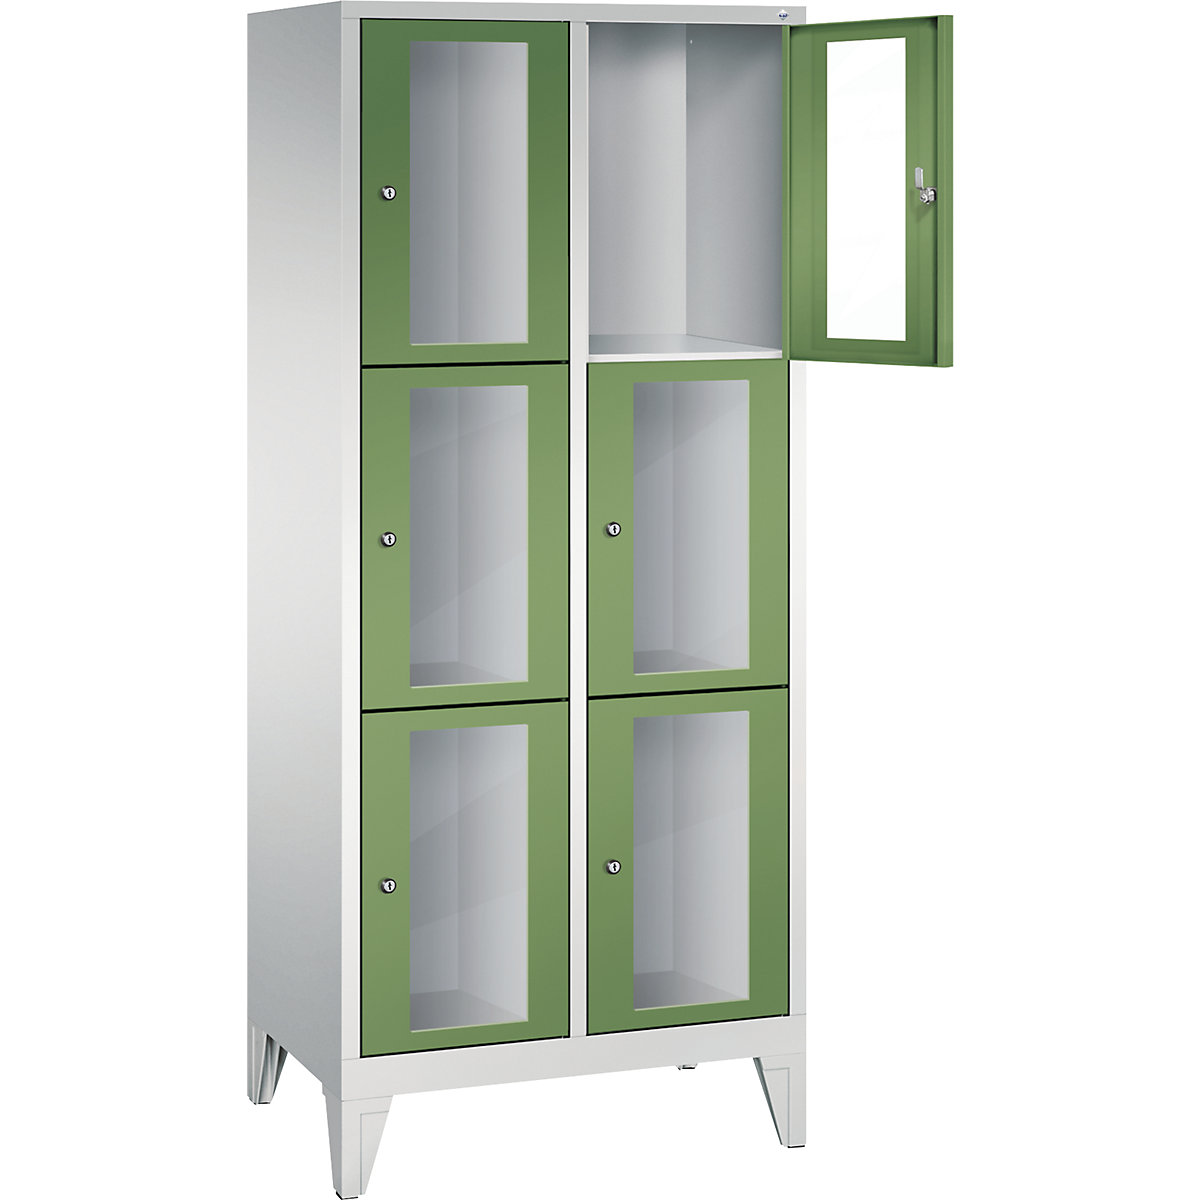 C+P – CLASSIC locker unit, compartment height 510 mm, with feet, 6 compartments, width 810 mm, reseda green door